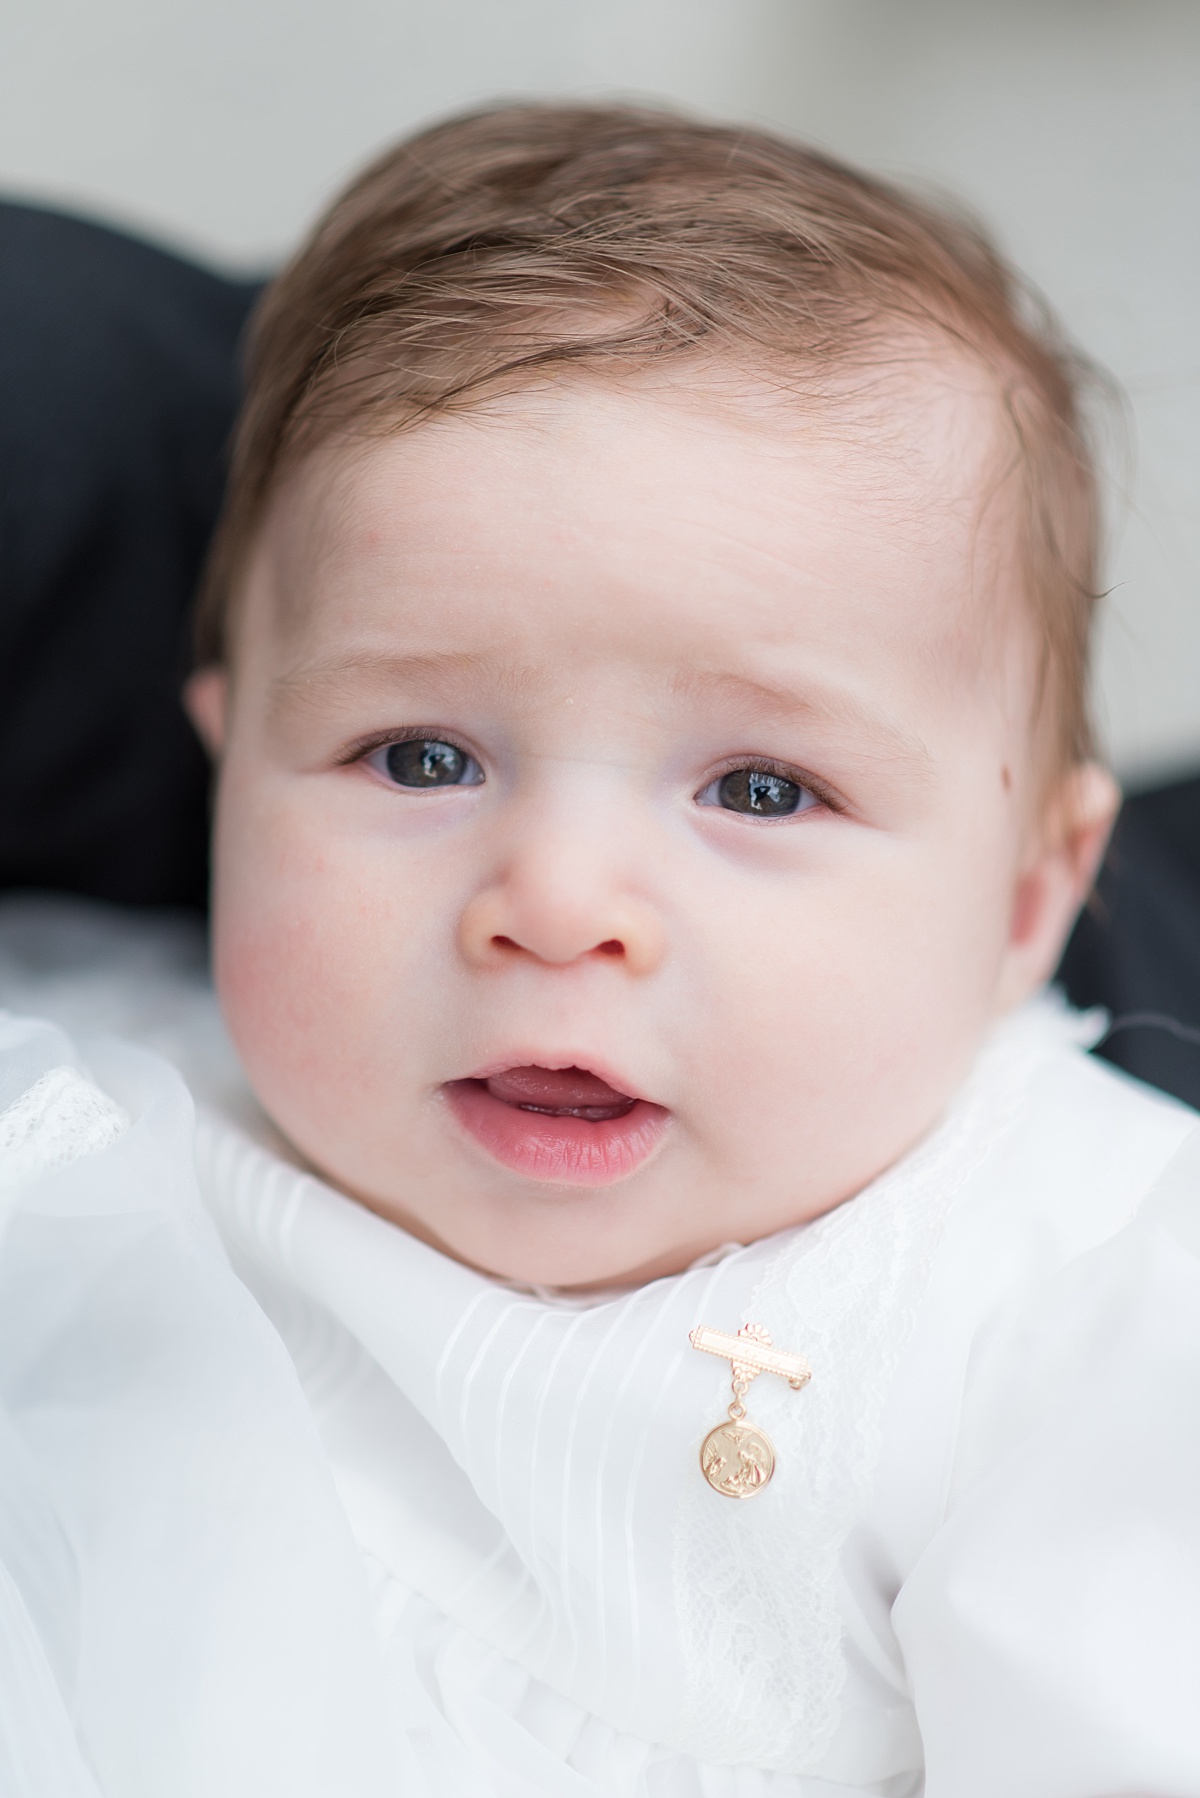 Baby being Baptized at St. Mary's Bascilica in Old Town Alexandria, VA by Erin Tetterton Photography